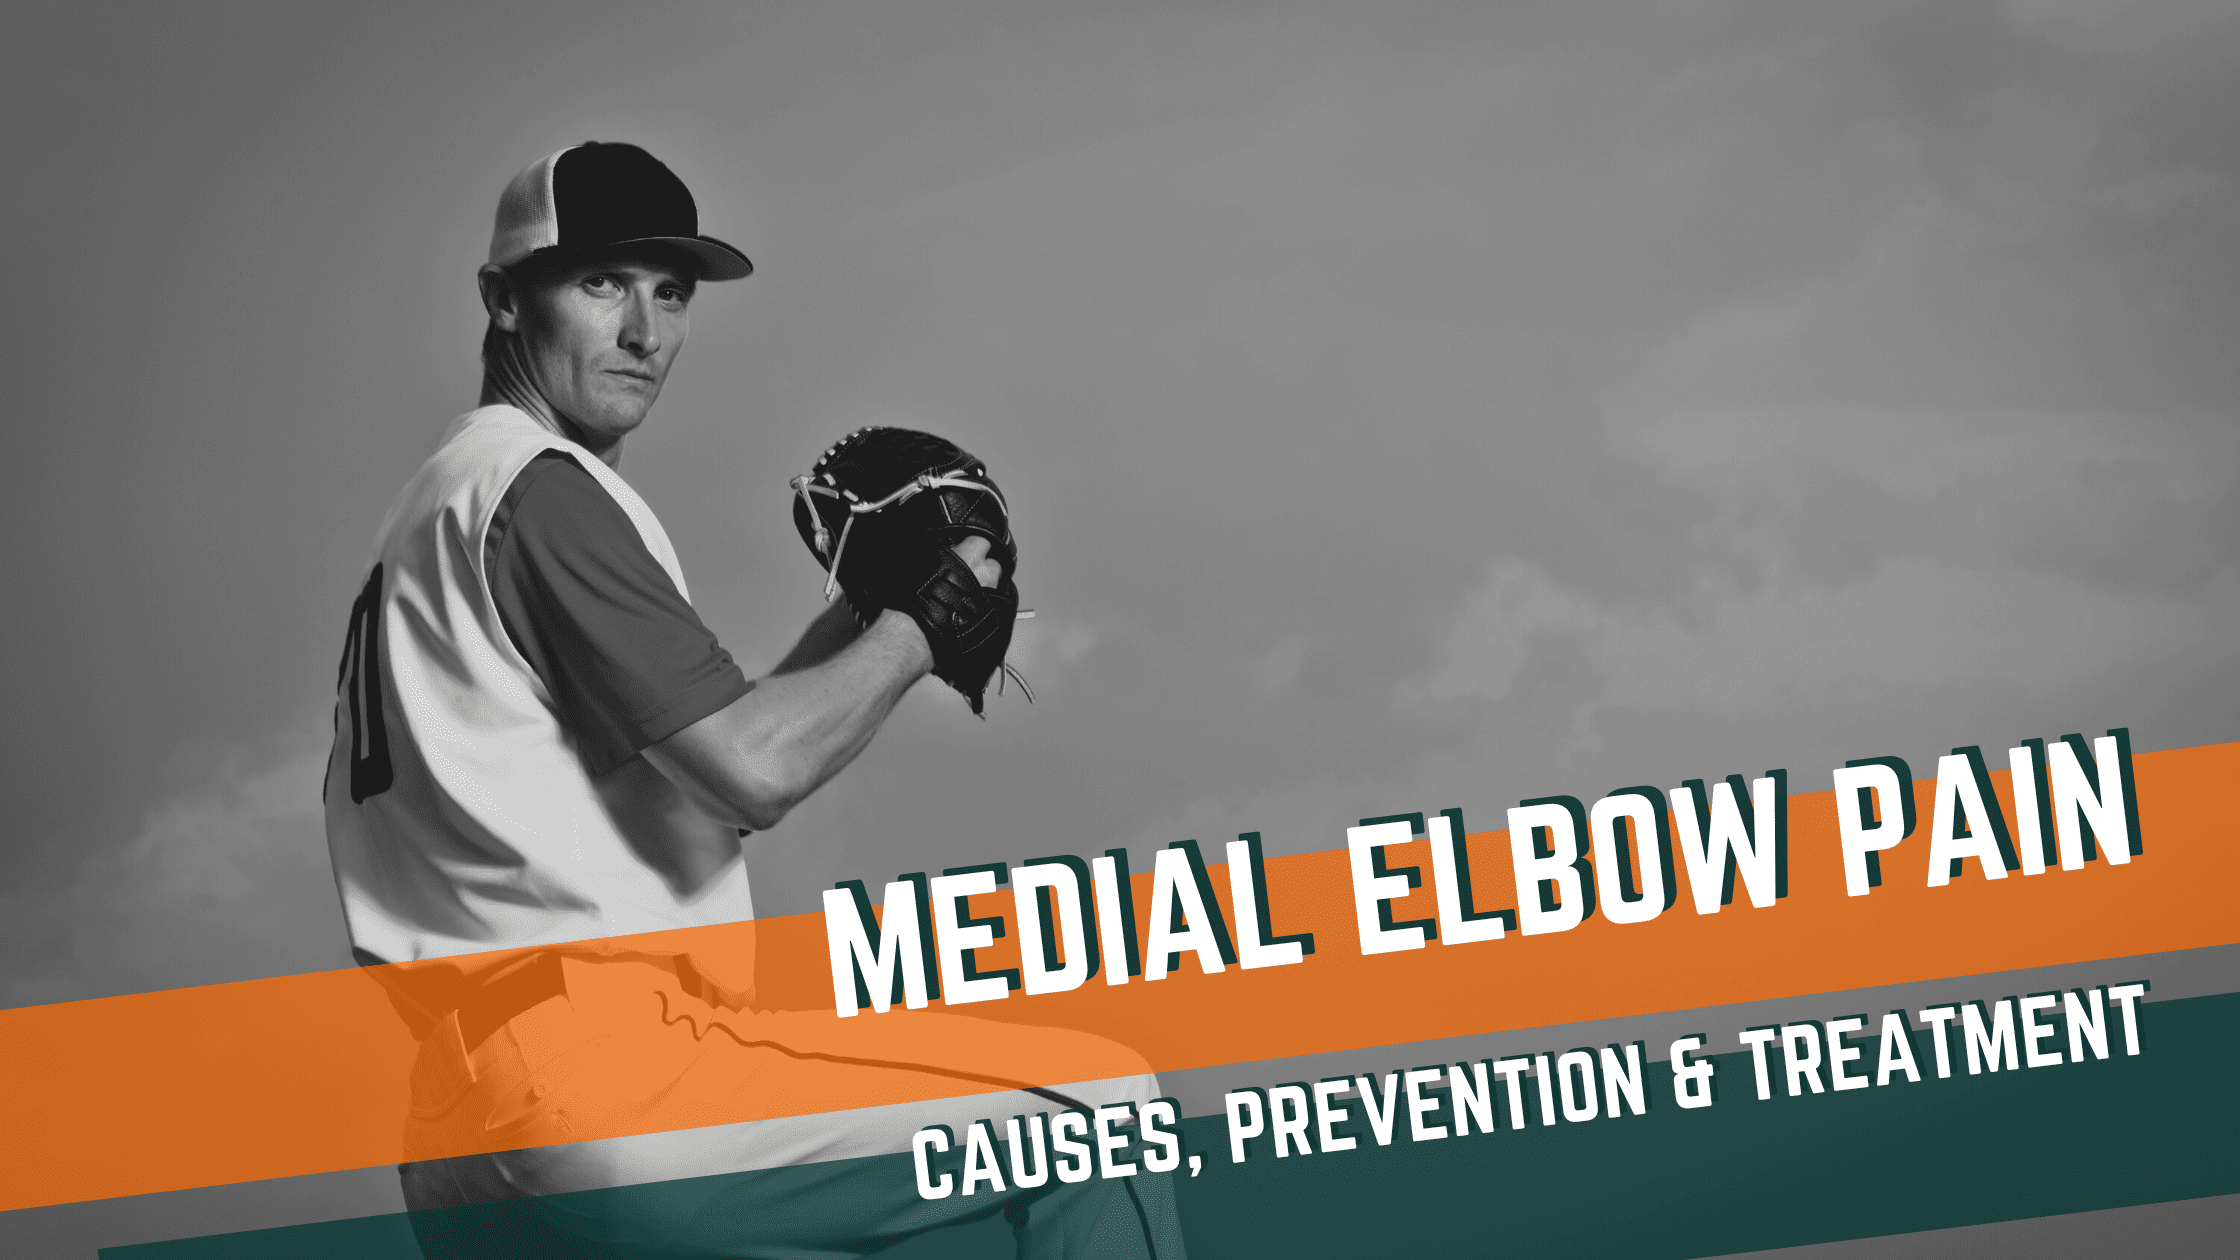 Medial Elbow Pain in Baseball & Softball Players